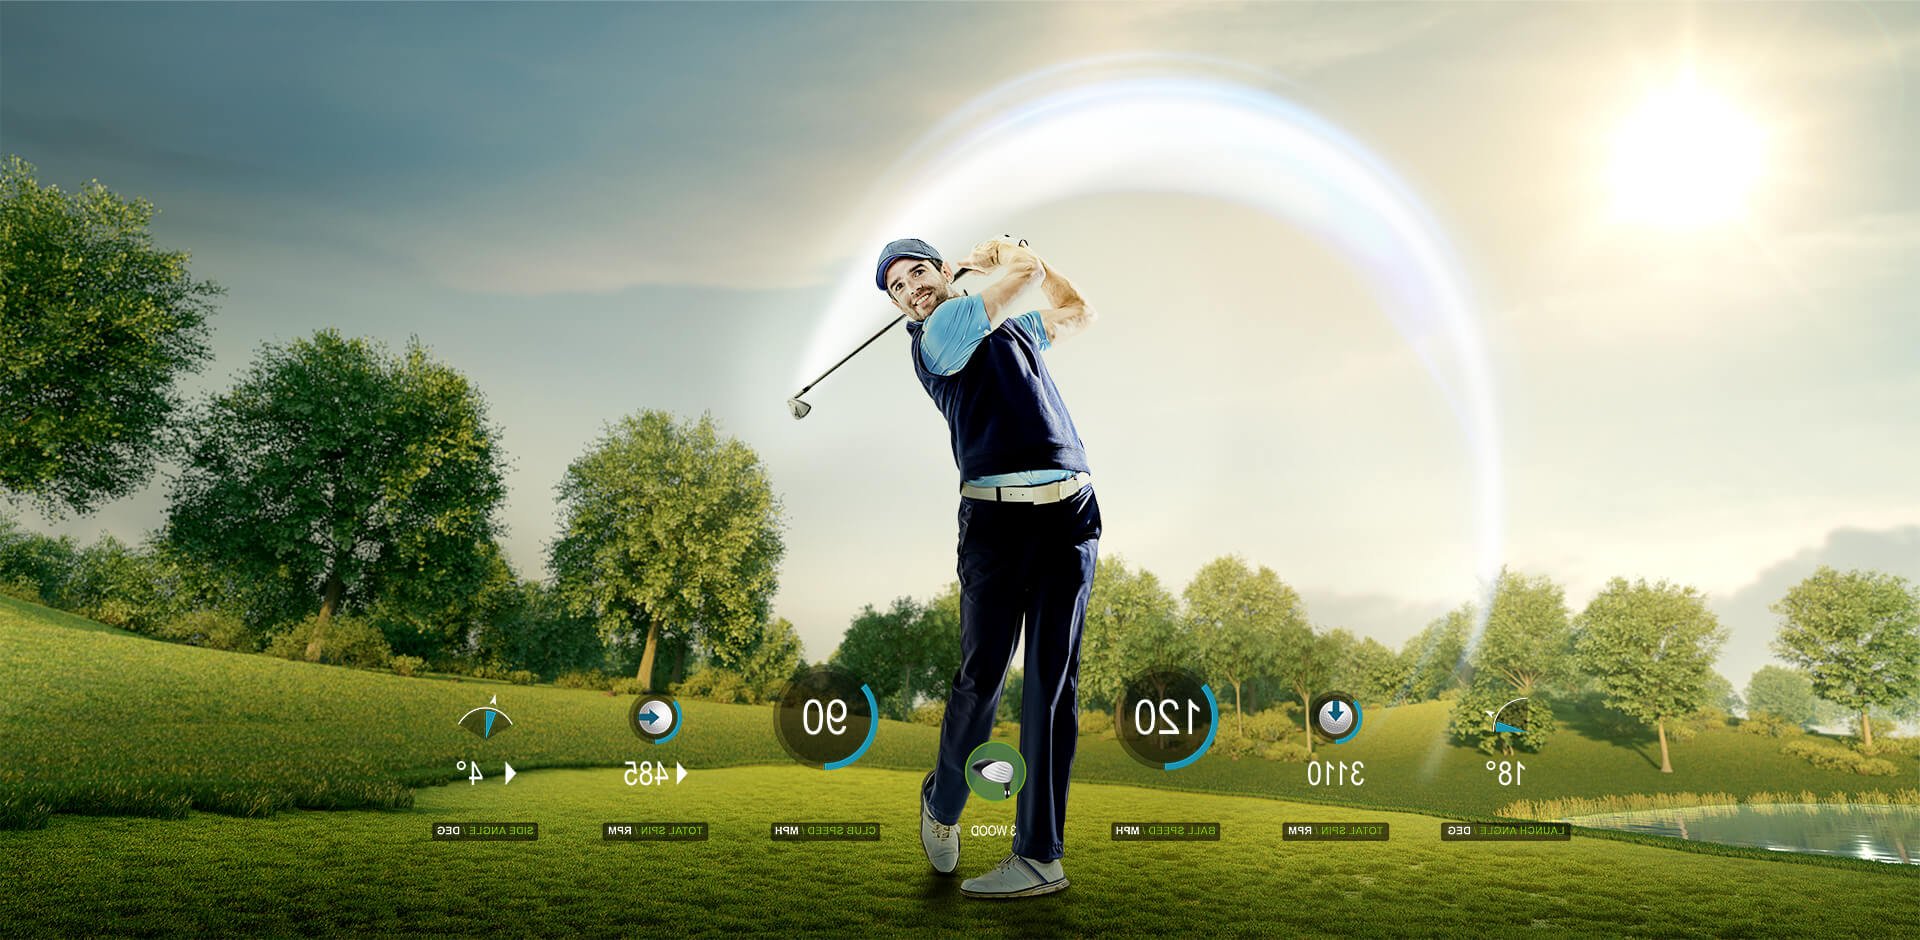 BenQ Installation Projectors offers you real progress with realistic golf practice